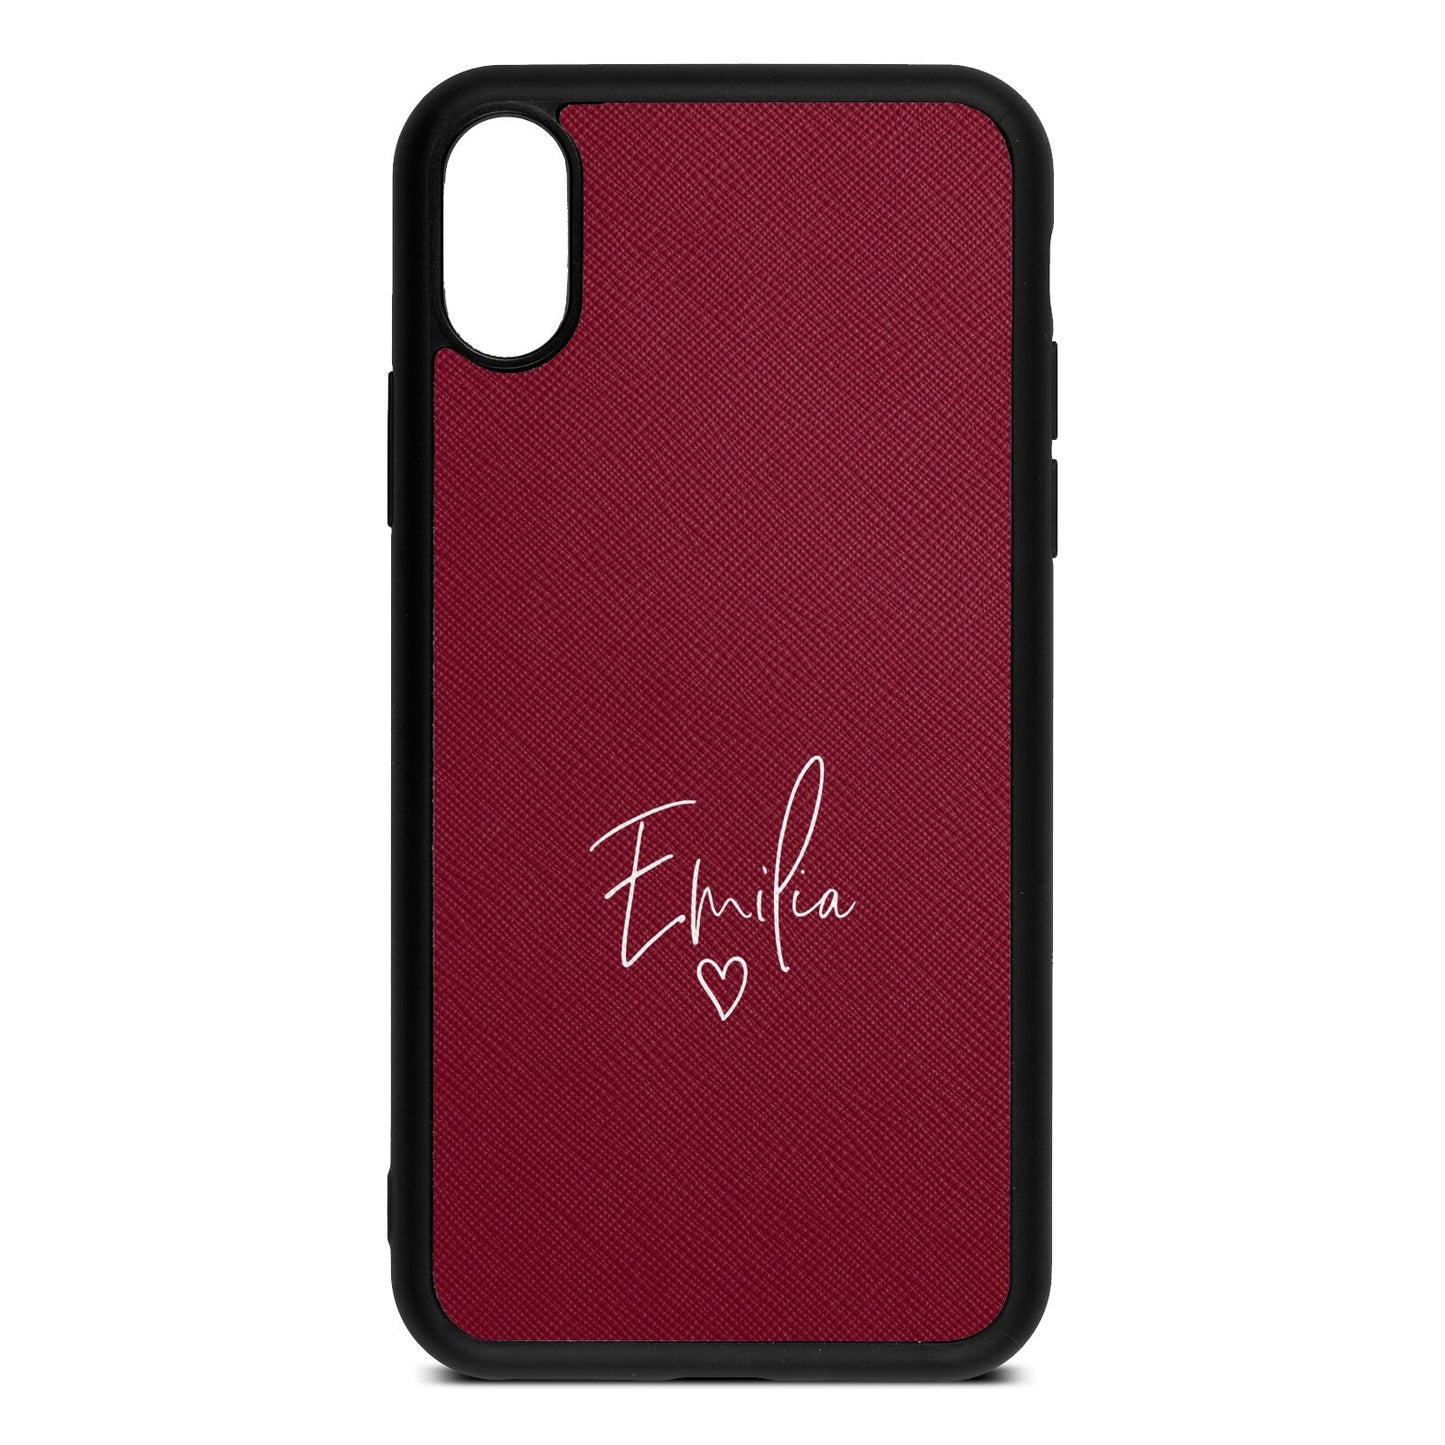 White Handwritten Name Transparent Wine Red Saffiano Leather iPhone Xs Case